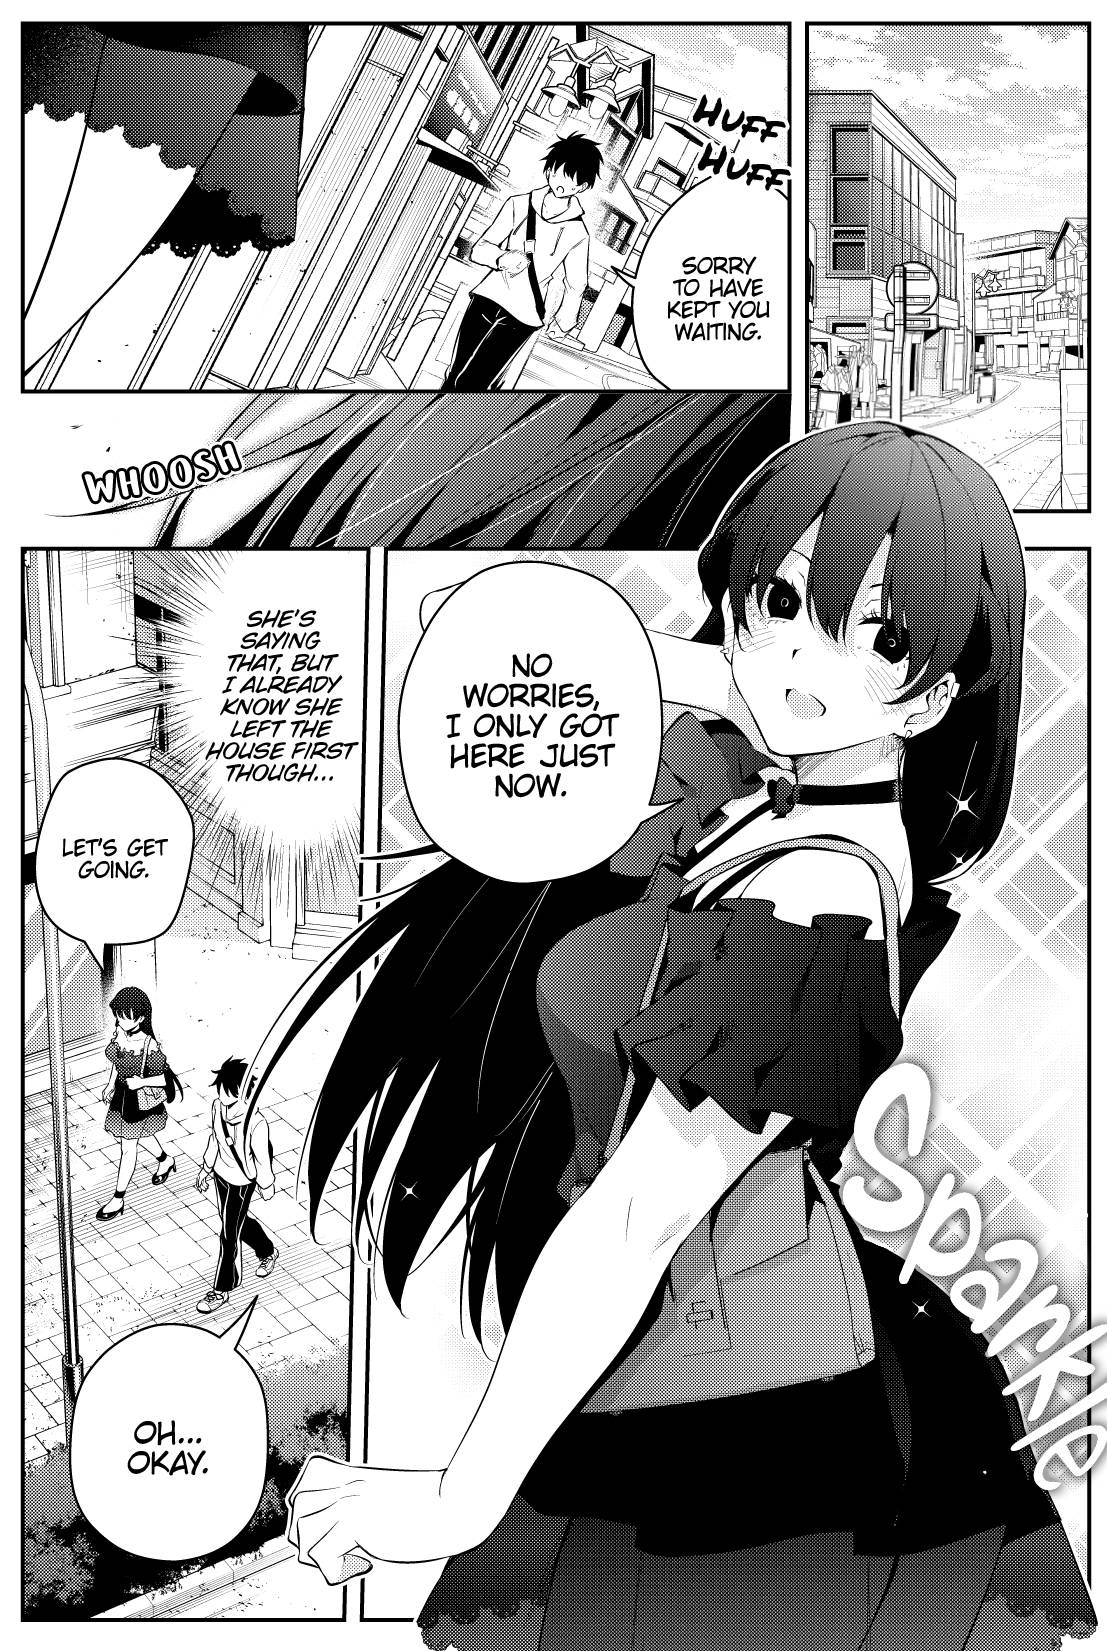 The Story Of A Manga Artist Confined By A Strange High School Girl - chapter 43 - #5